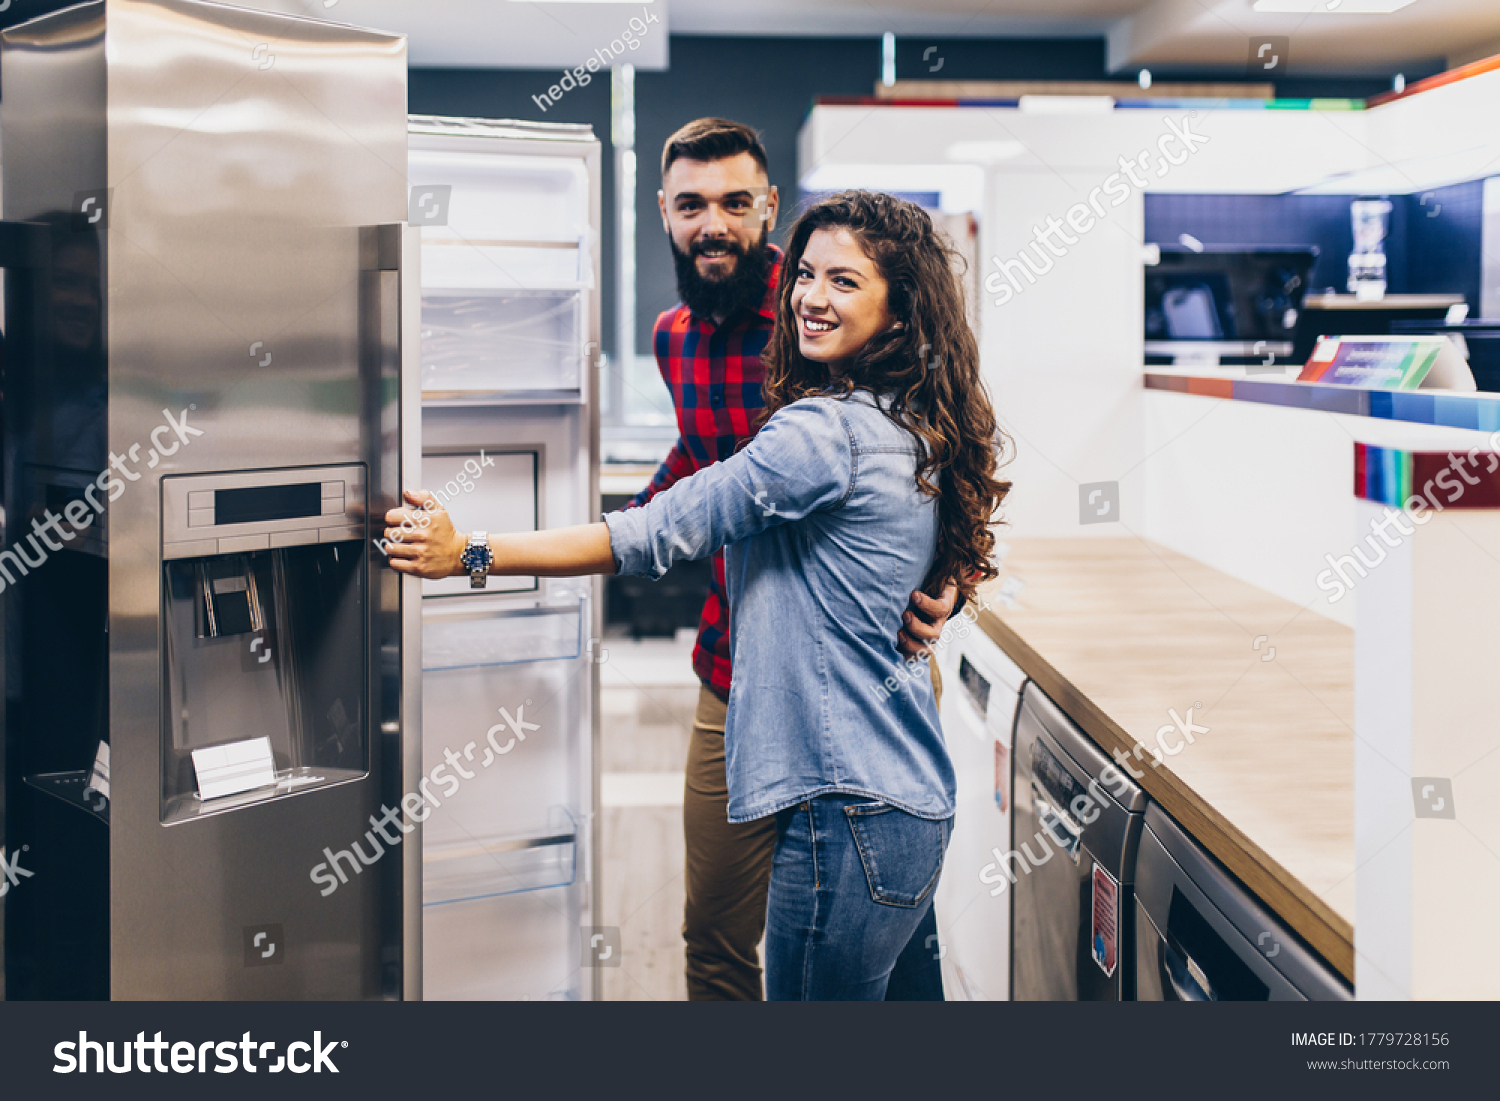 Young couple, satisfied customers choosing fridge in appliances store. #1779728156